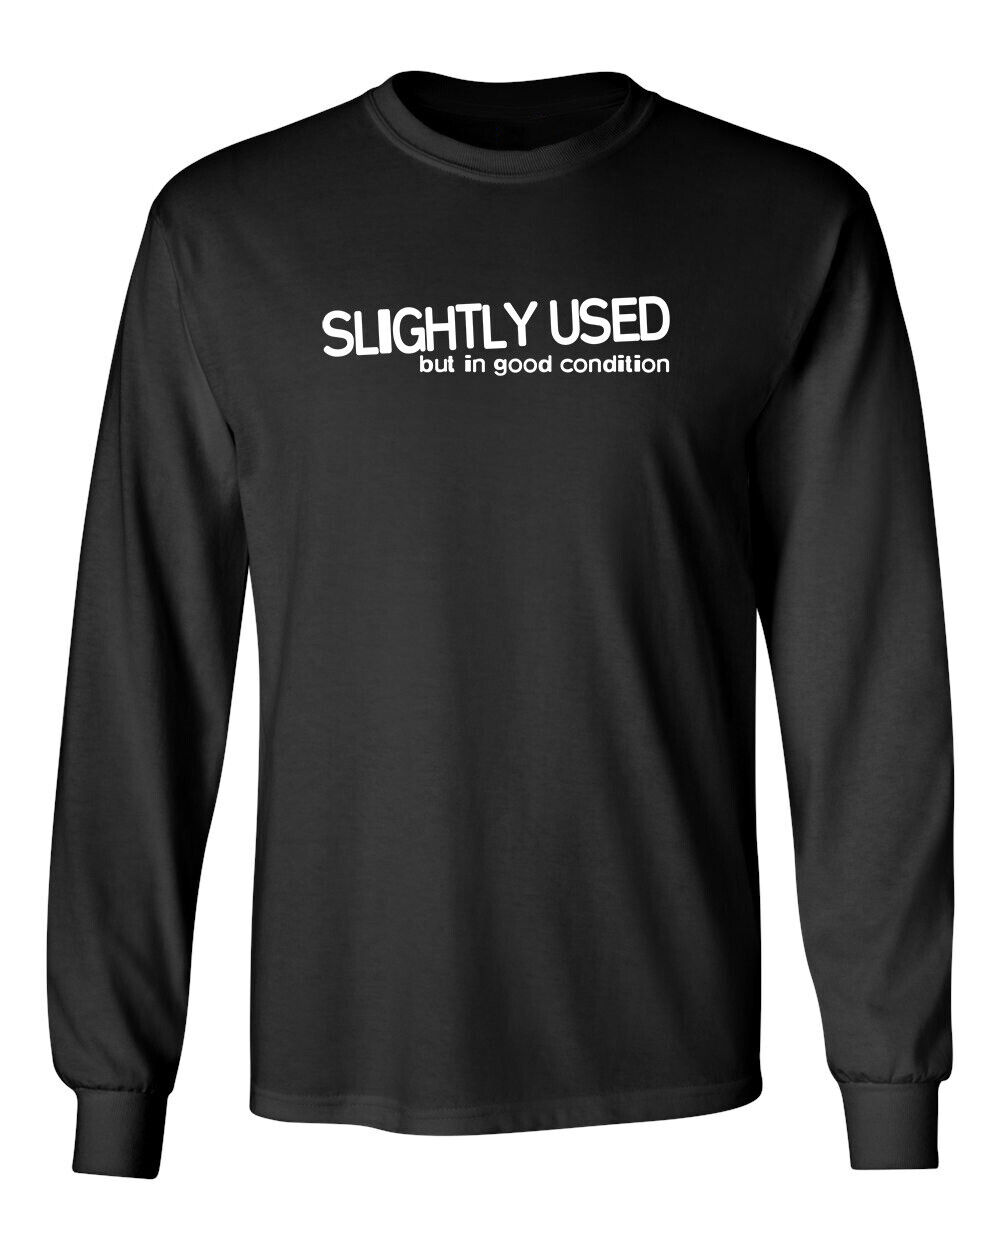 Slightly Used But In Good Novelty Sarcastic Humor Men\'s Long Sleeve Shirt